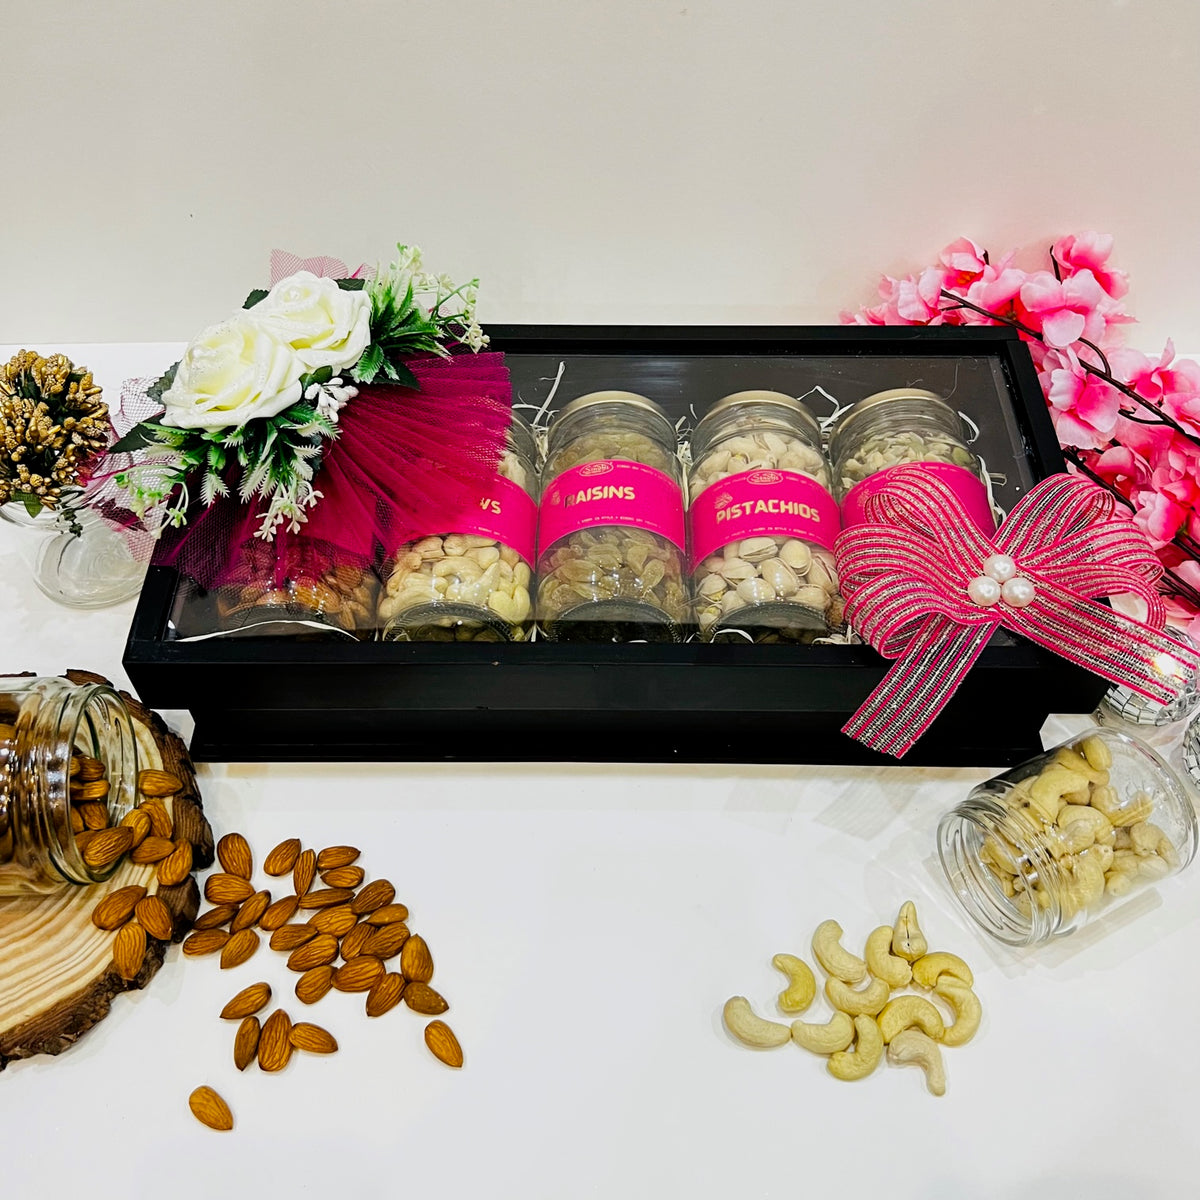 Diwali Gift Hamper Containing Dry fruits and Assorted Edibles